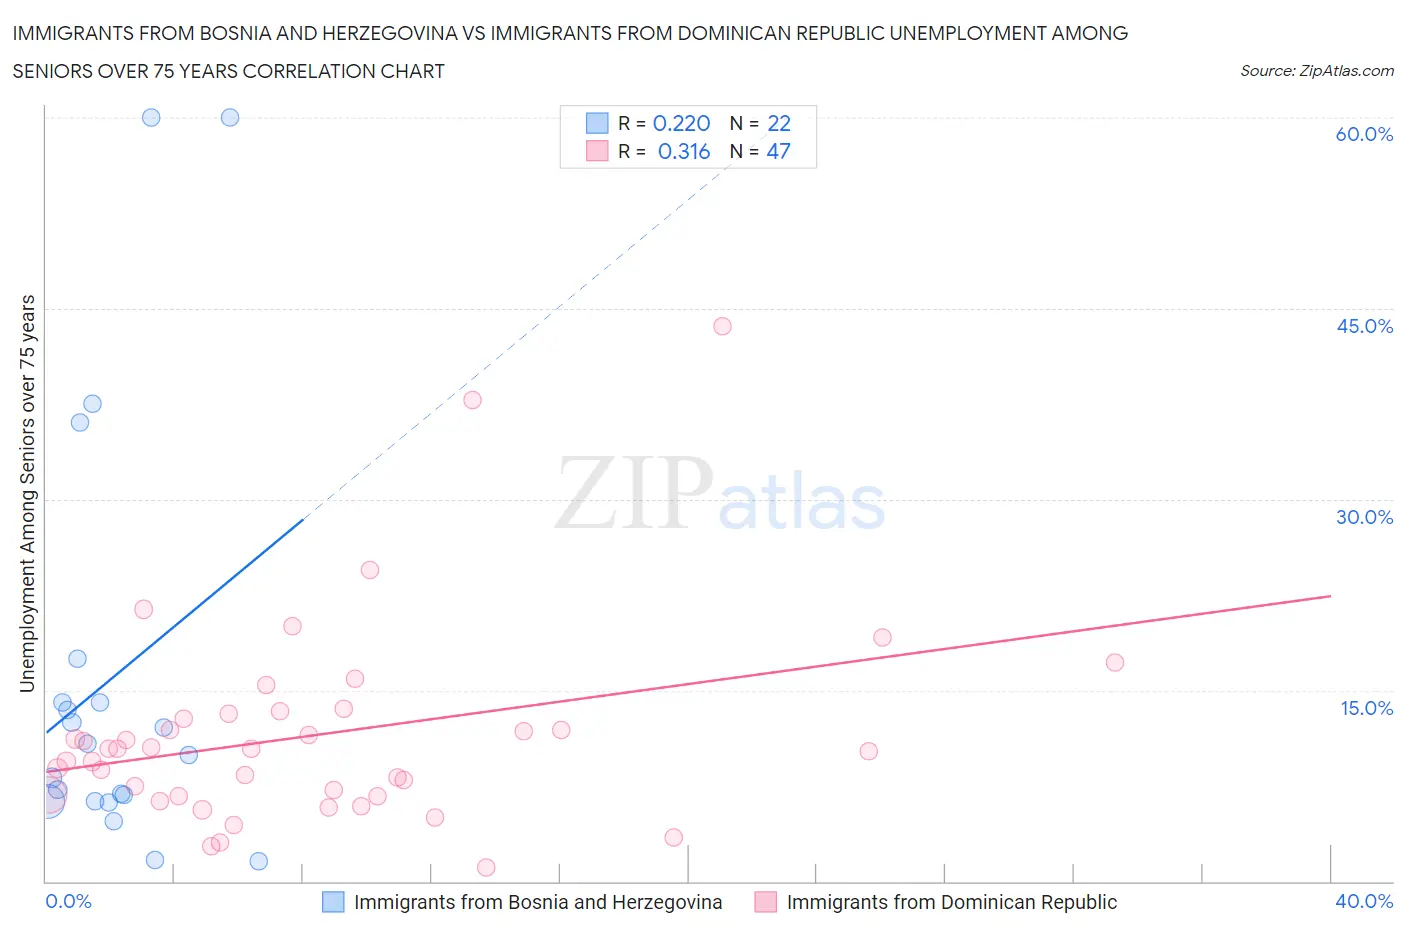 Immigrants from Bosnia and Herzegovina vs Immigrants from Dominican Republic Unemployment Among Seniors over 75 years